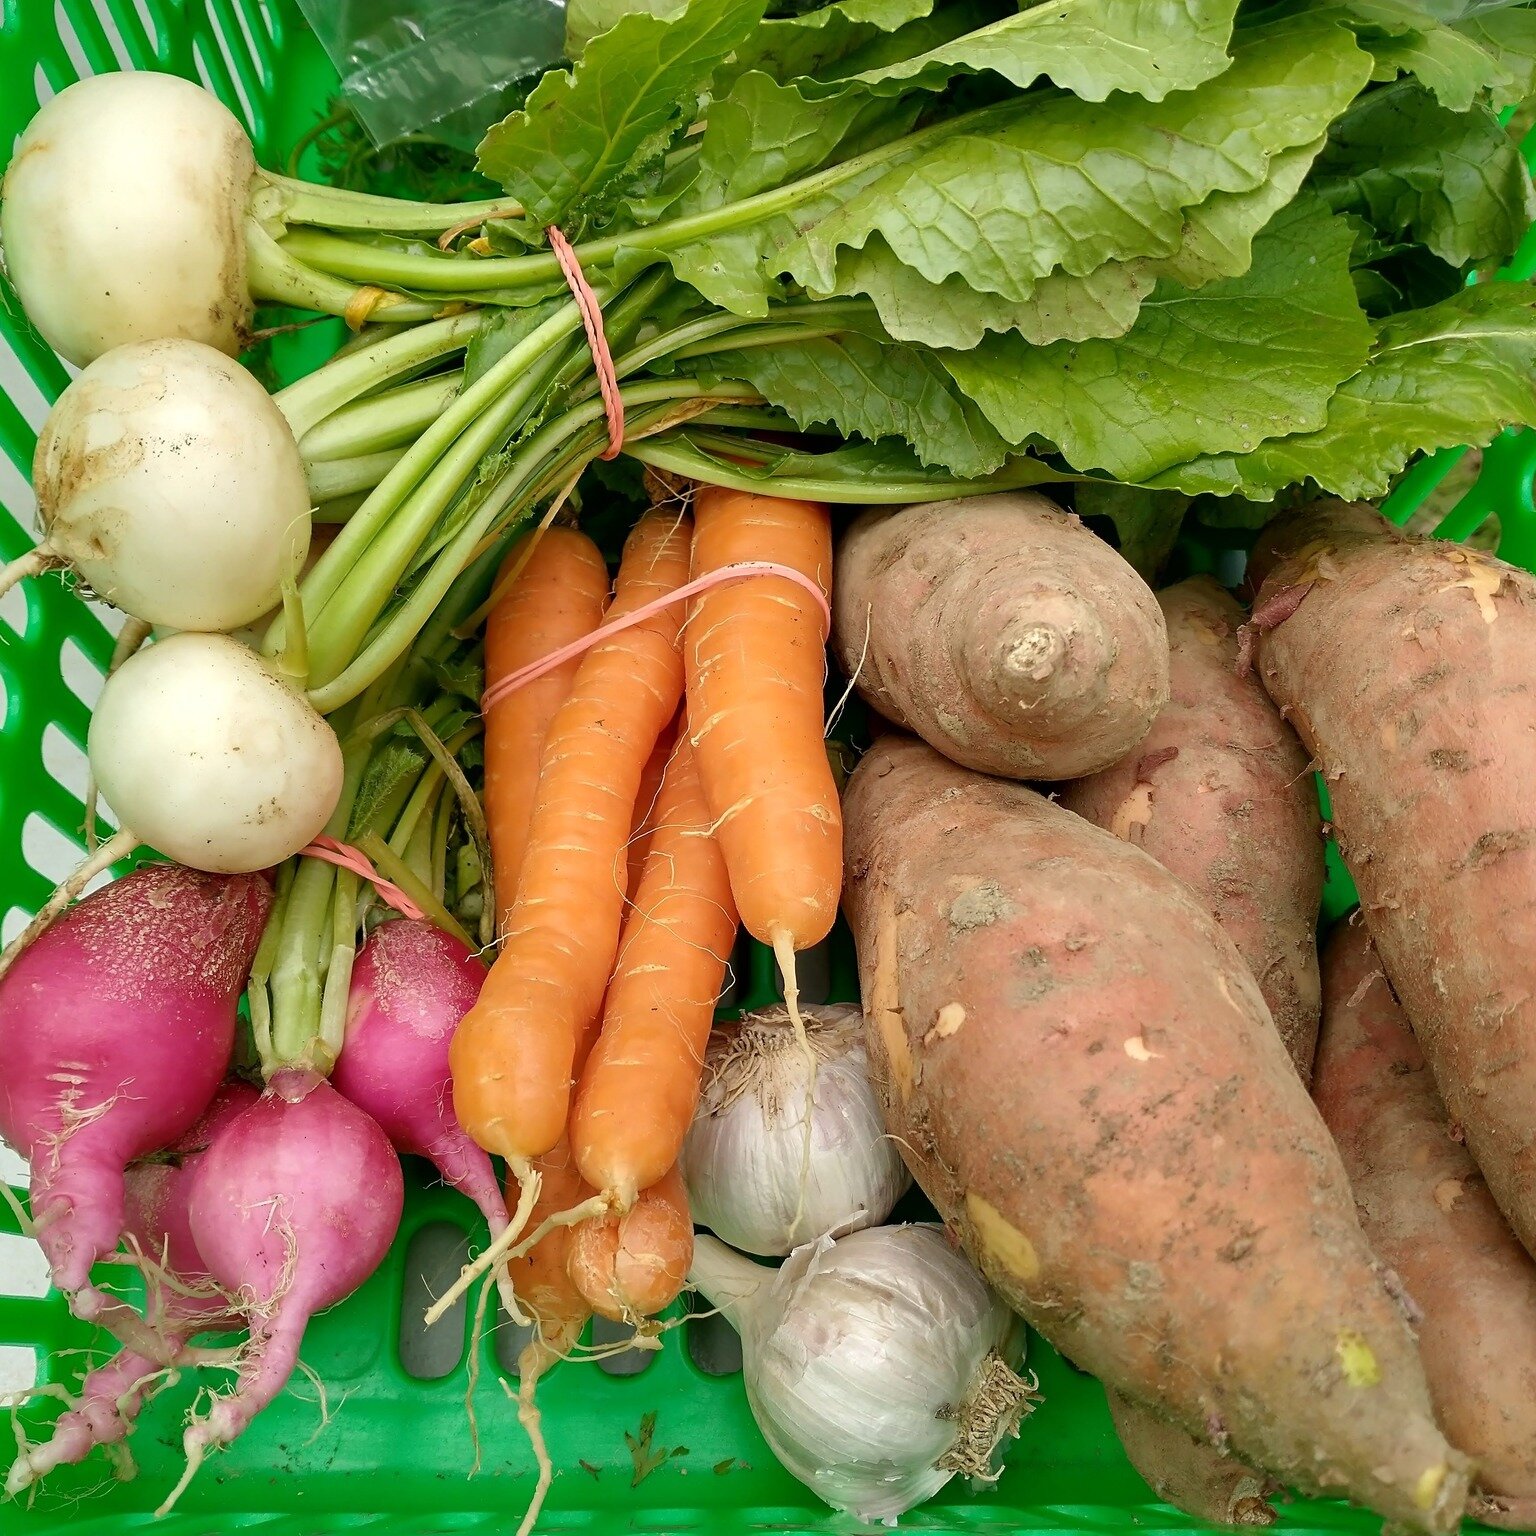 Fresh this week: turnips, radishes, carrots, sweet potatoes, garlic, kale, arugula, pie pumpkins, butternut squash, celery, leeks, eggplant, romano beans, napa cabbage, and more!

Stop by the Farm Stand 12-6pm Friday and 9am-3pm Saturday.